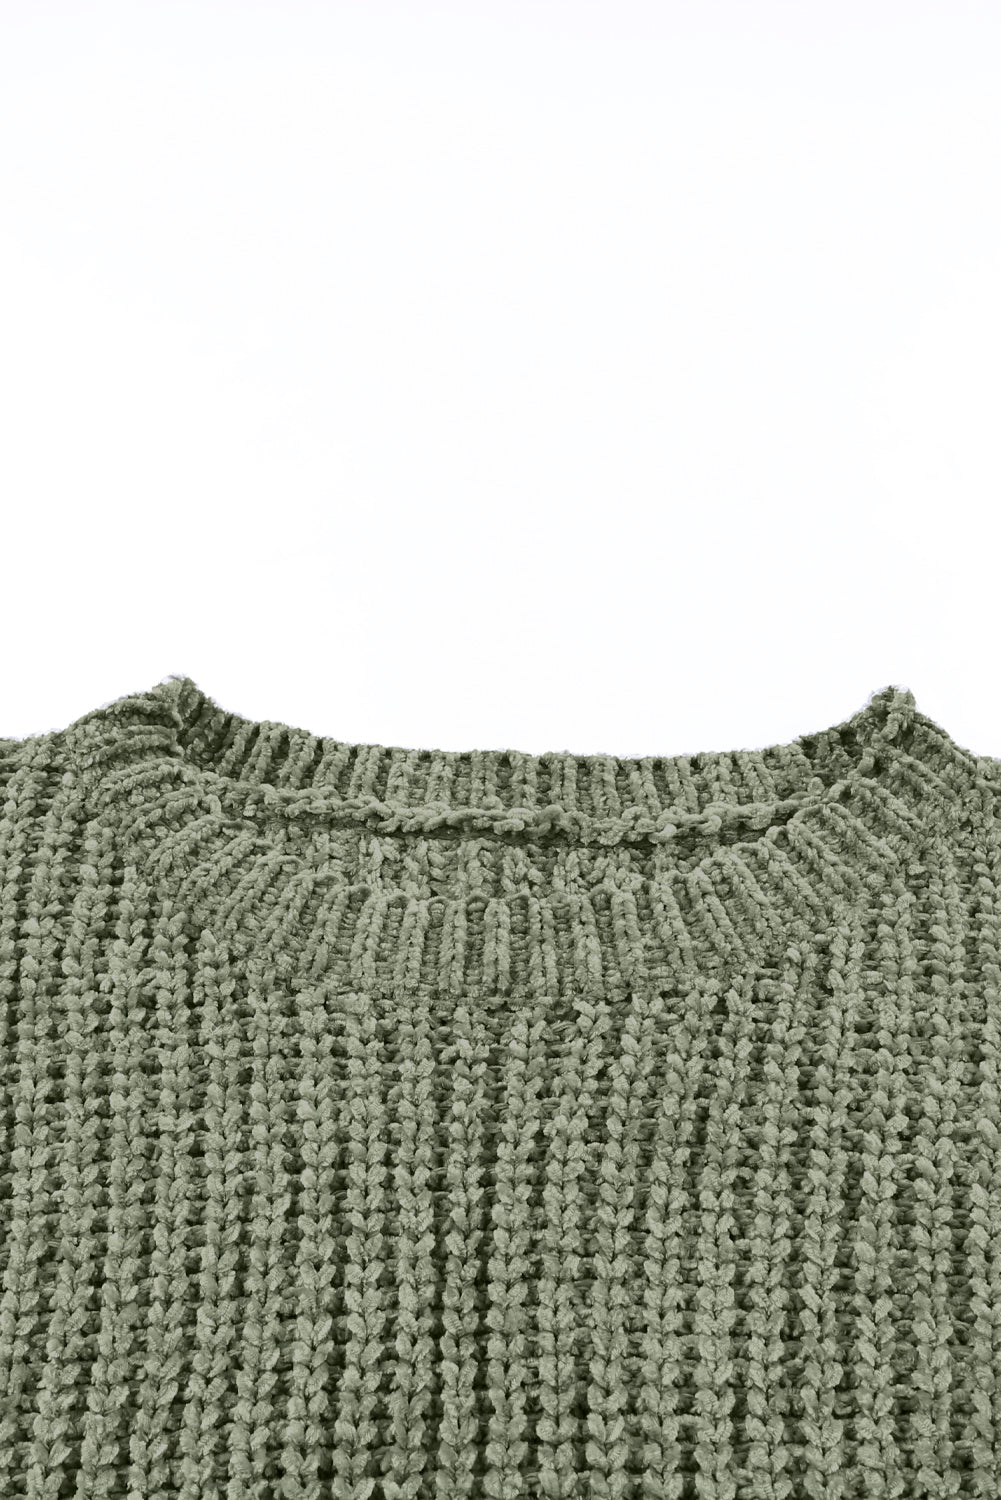 Green Long Sleeve Round Hem Cable Knit Sweater Sweaters & Cardigans JT's Designer Fashion